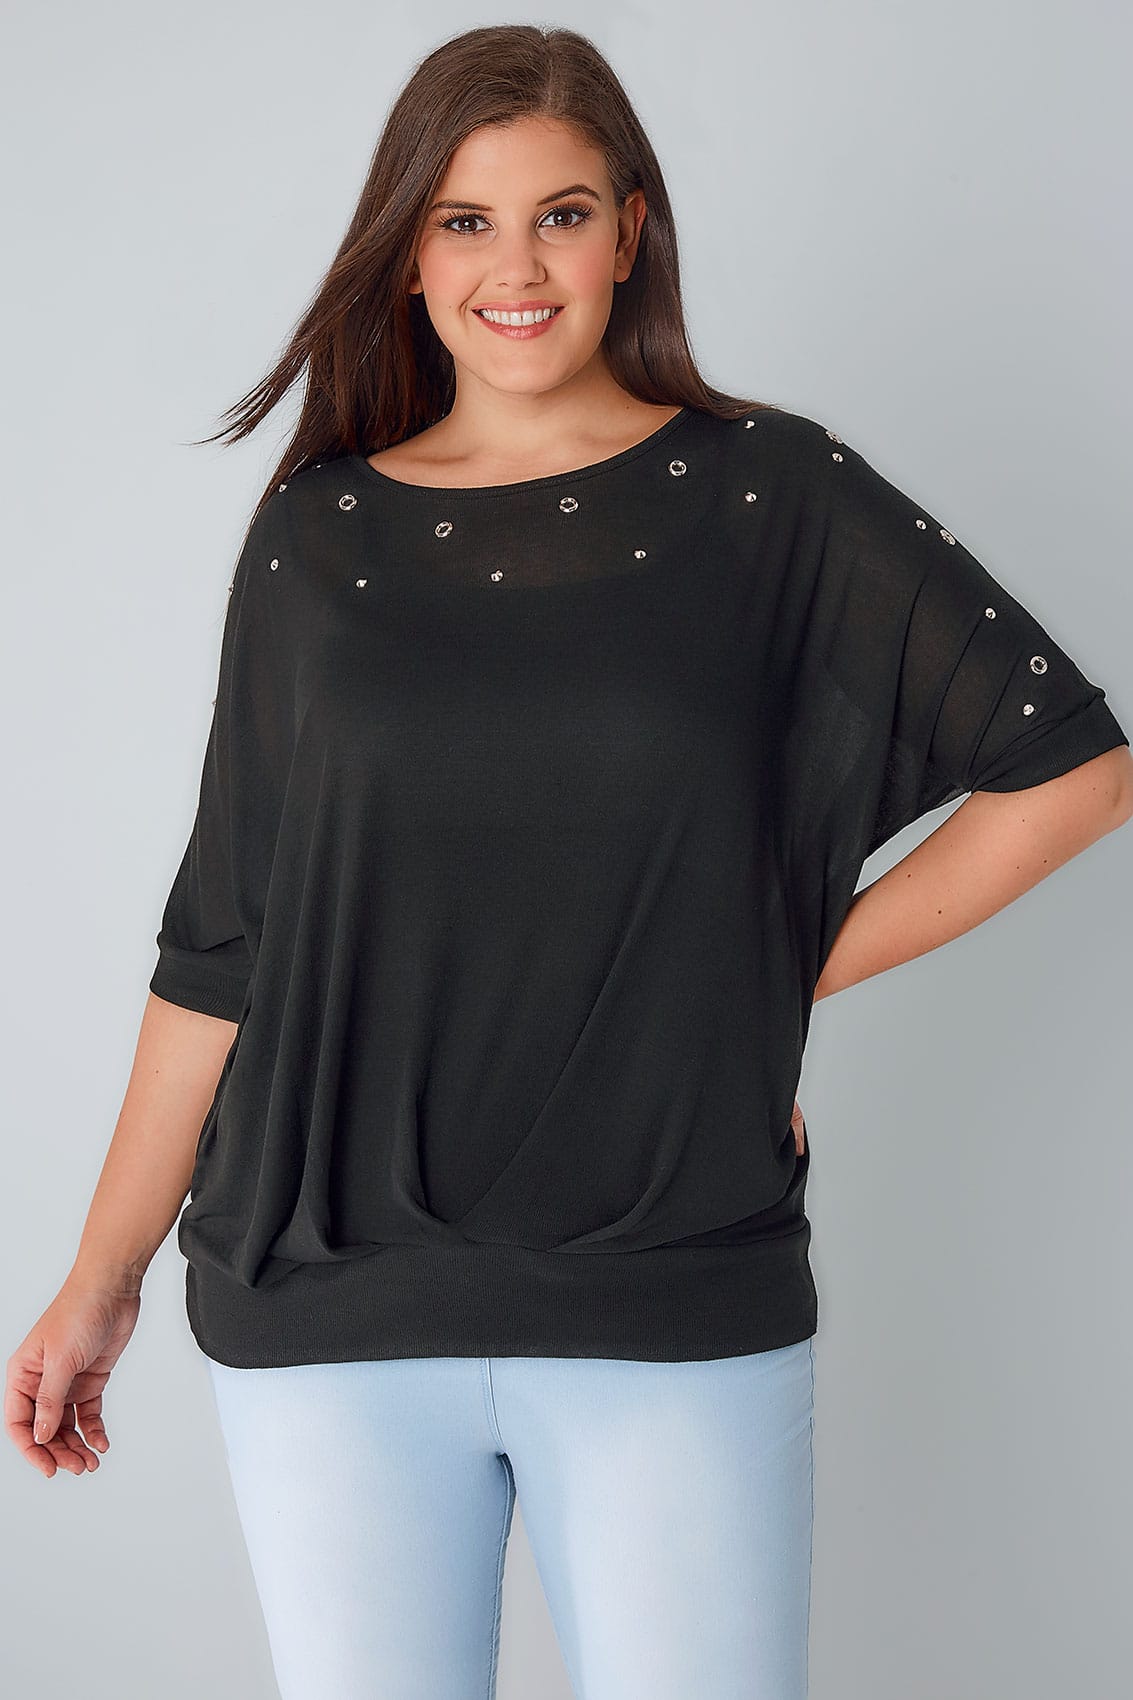 BLUE VANILLA CURVE Black Top With Eyelet Detail, Plus size 18 to 28